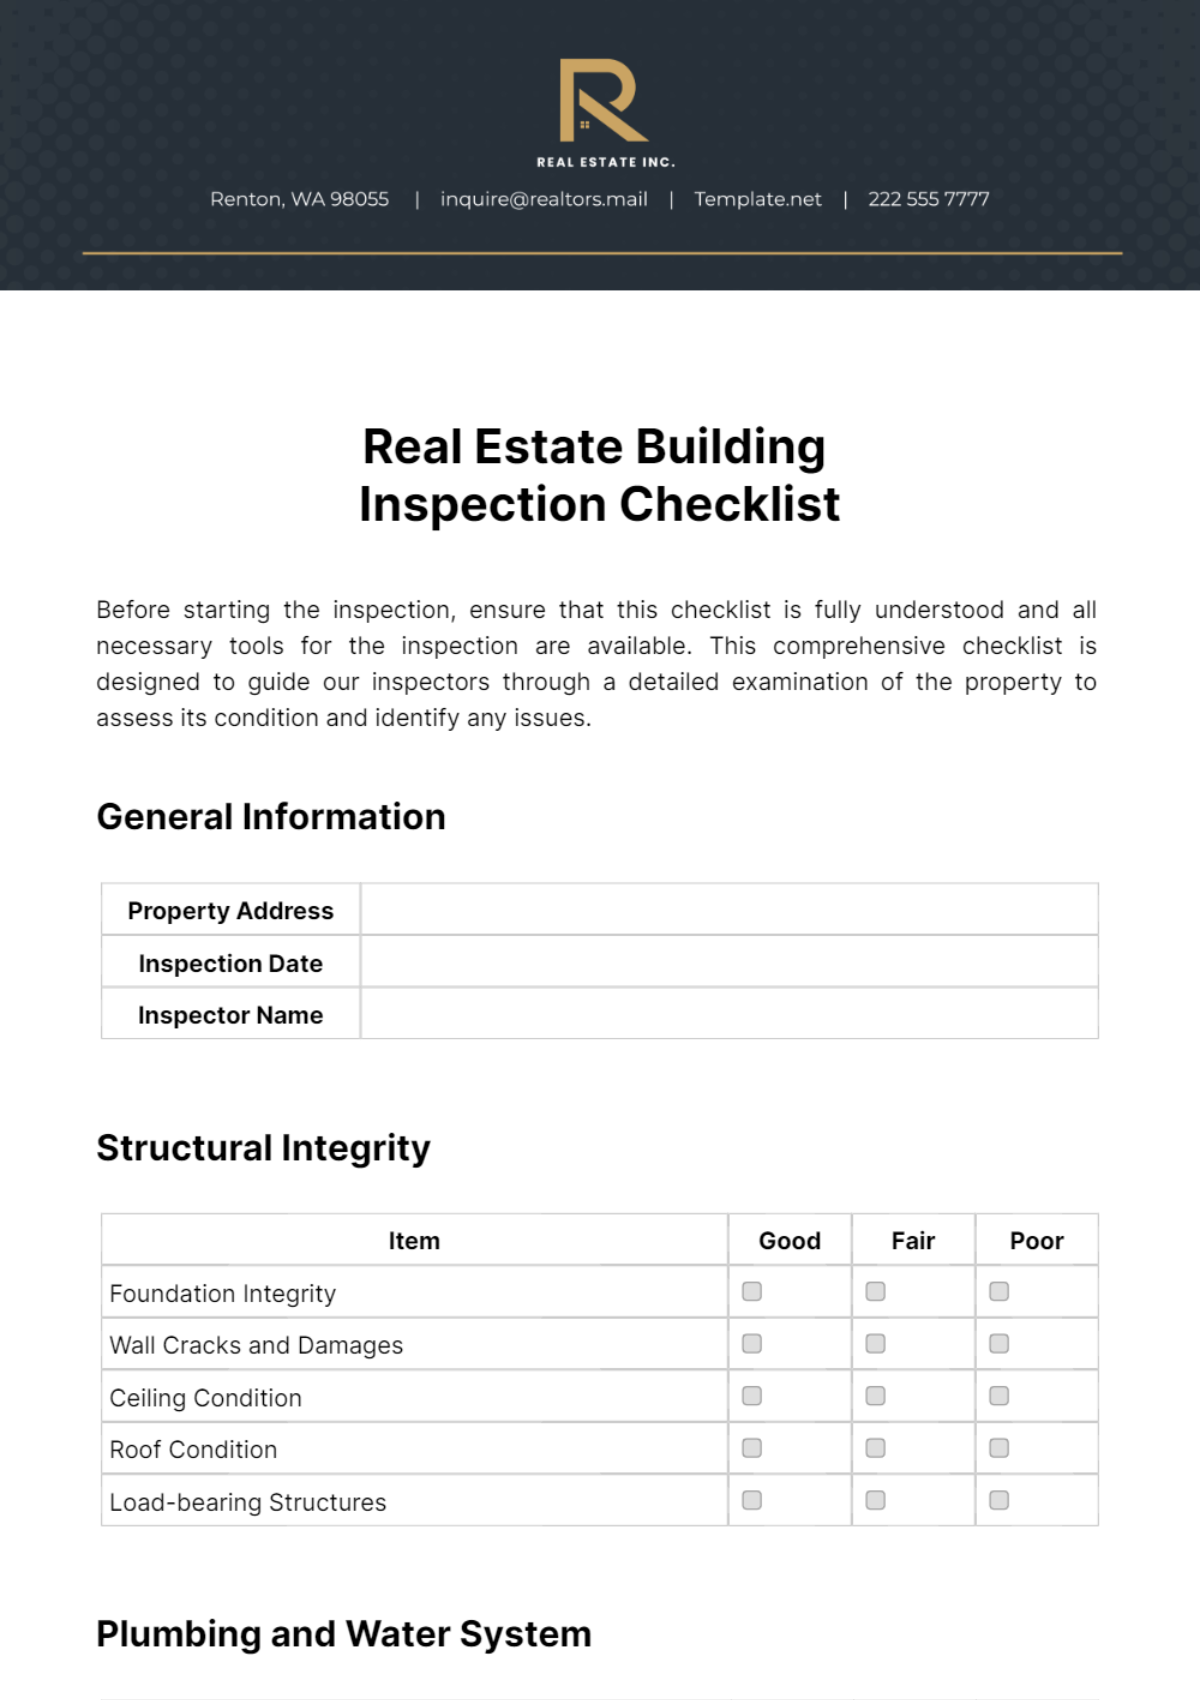 Real Estate Building Inspection Checklist Template